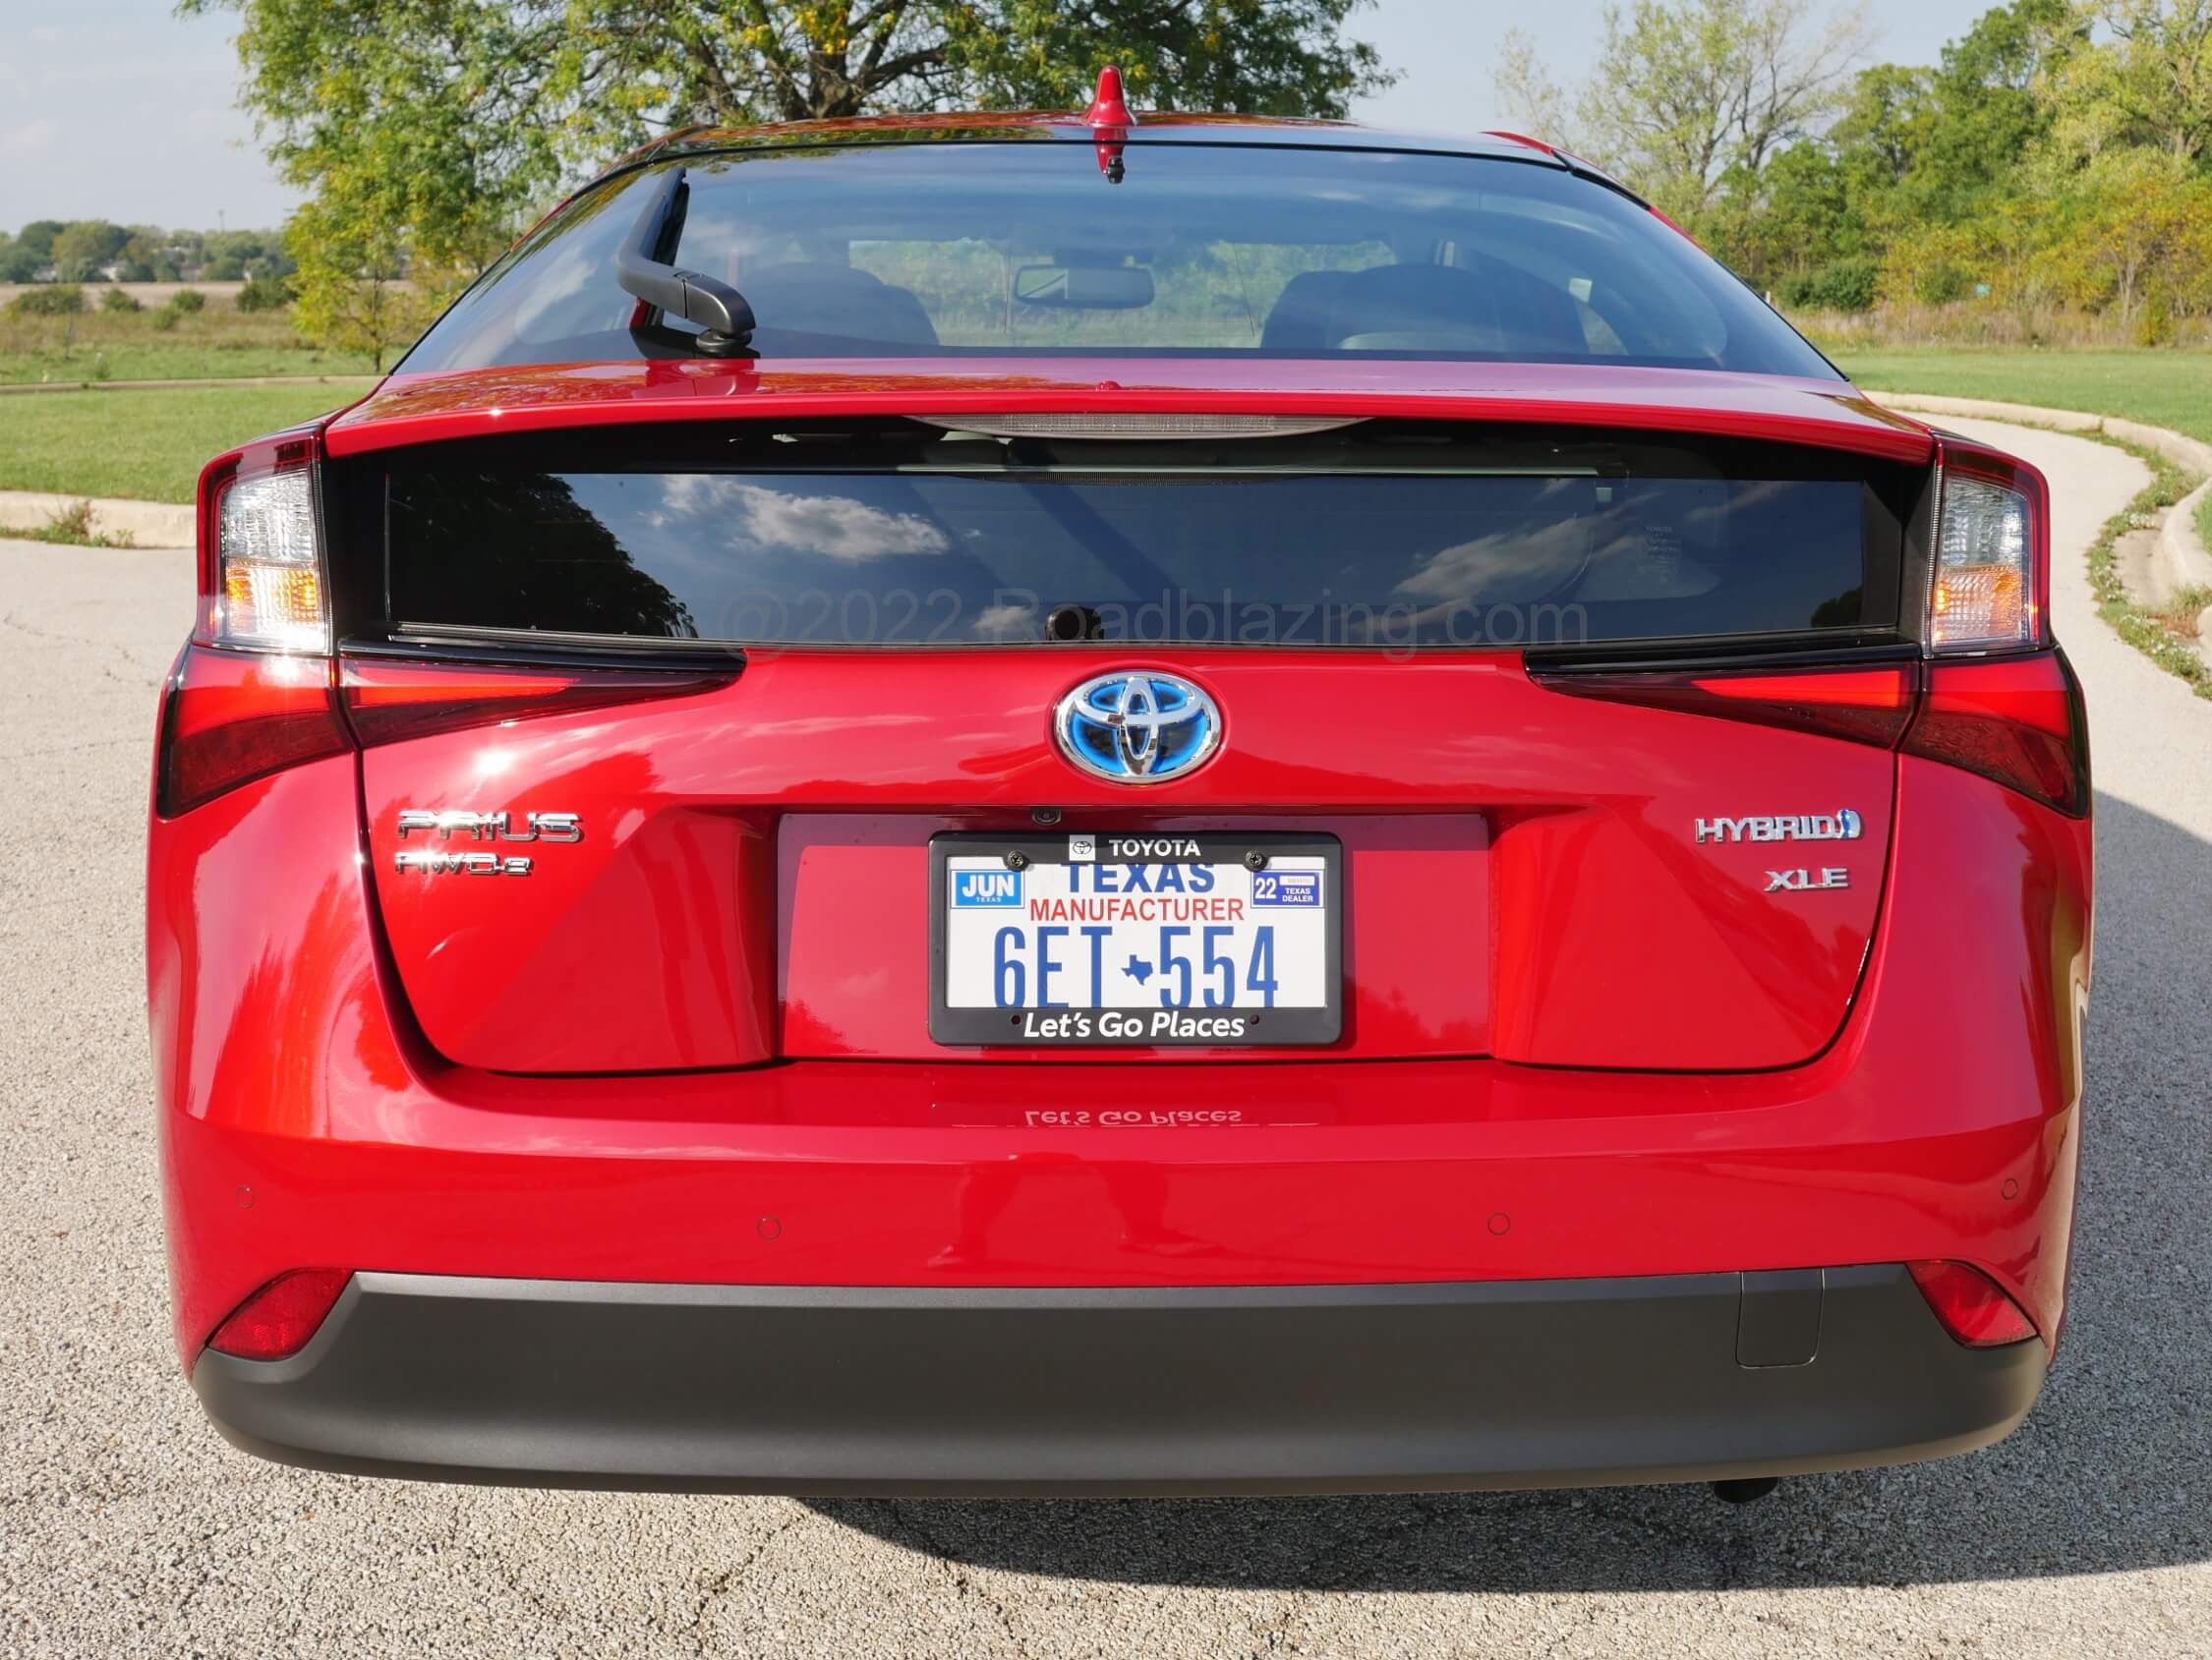 2022 Toyota Prius XLE AWD-e: Kammback liftgate lid lower backlight improves rear outward view